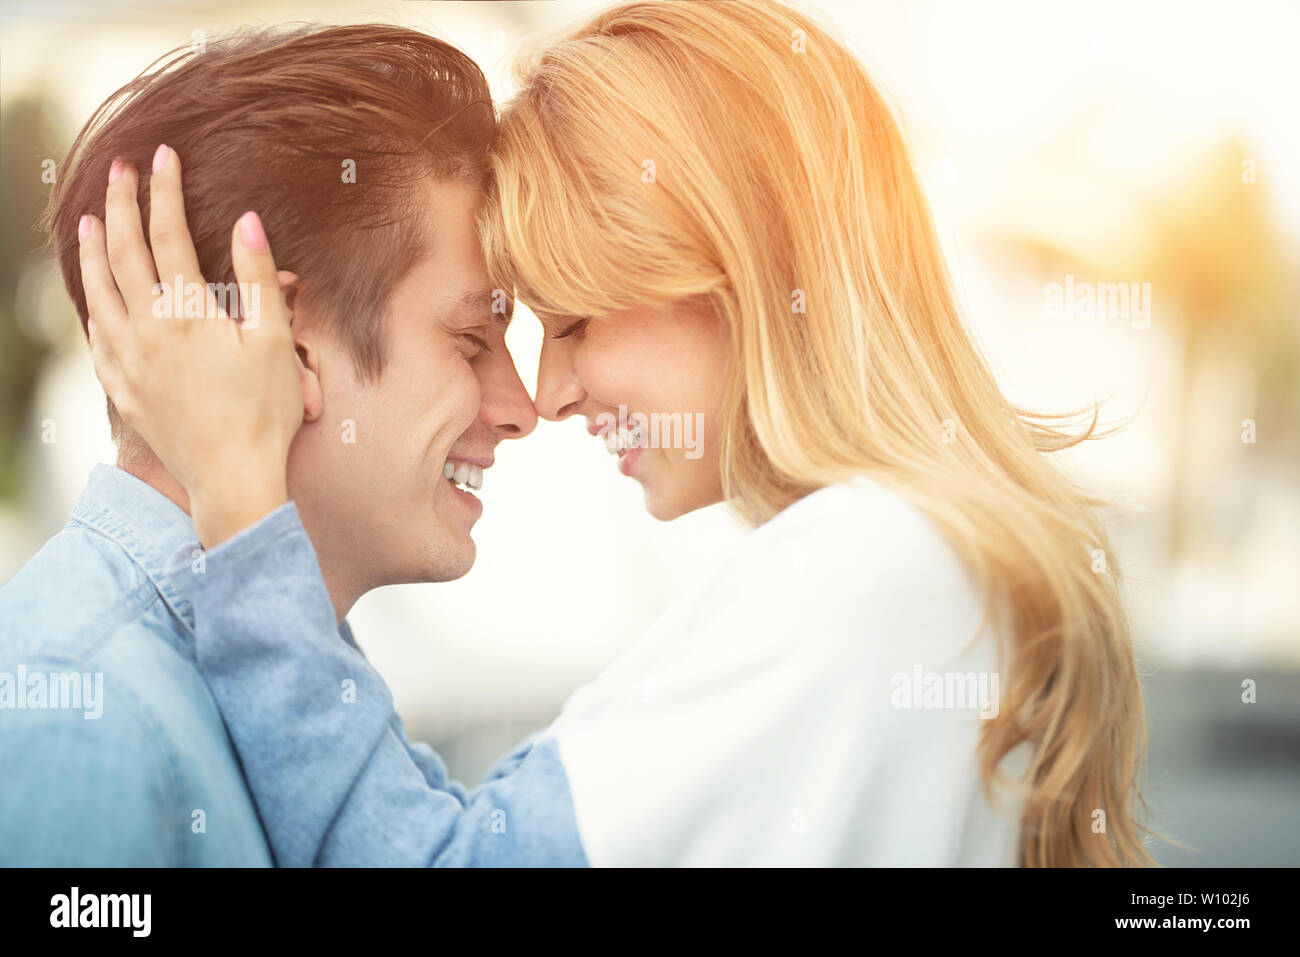 Beautiful couple in love dating outdoors and smiling. Beautiful girl embraces the guy Stock Photo